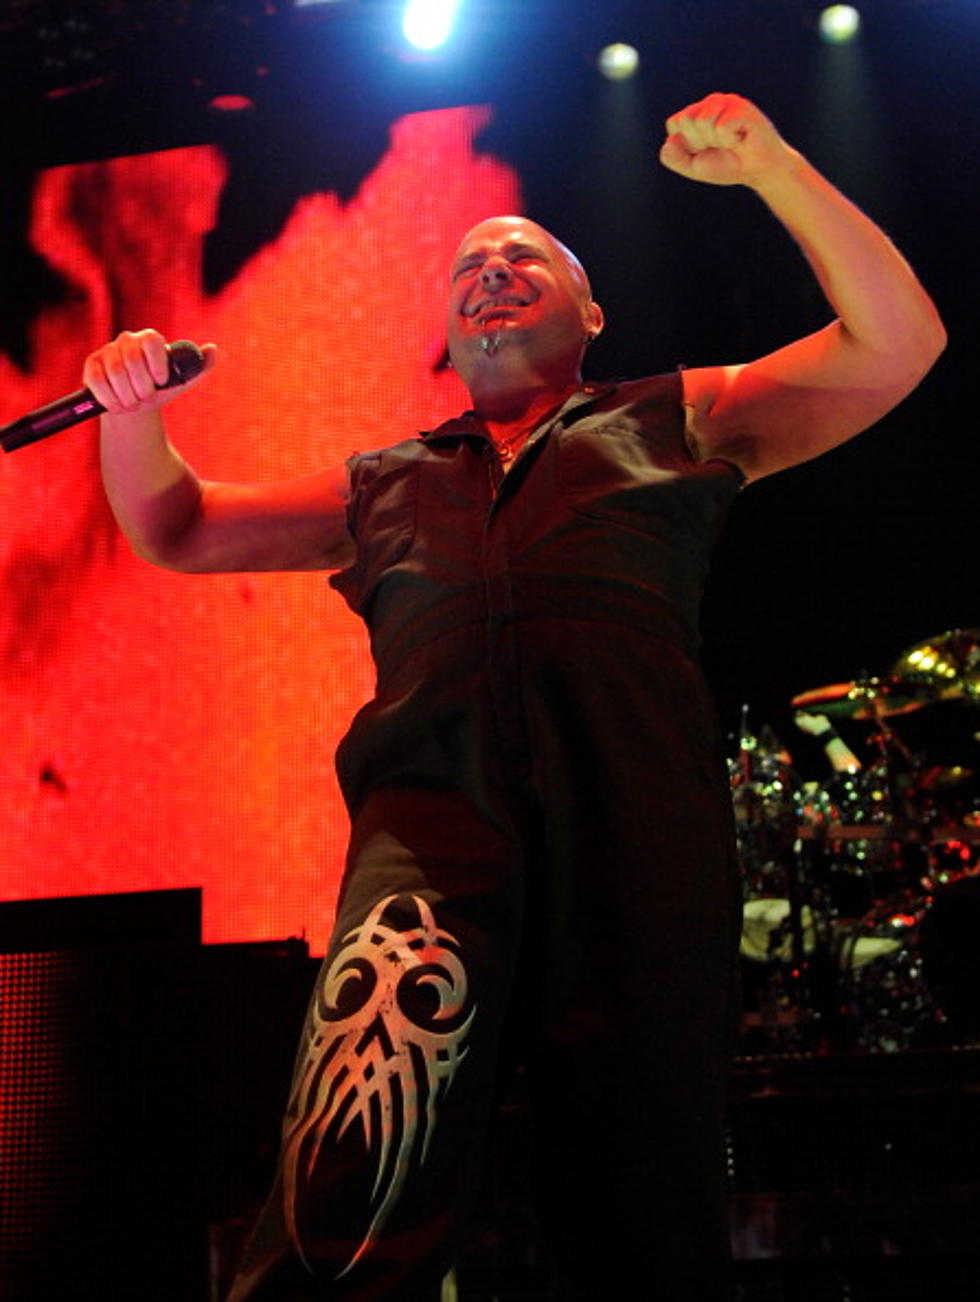 David Draiman Willing to Baby-sit Your Children So You Can Go Out! Or Maybe Not